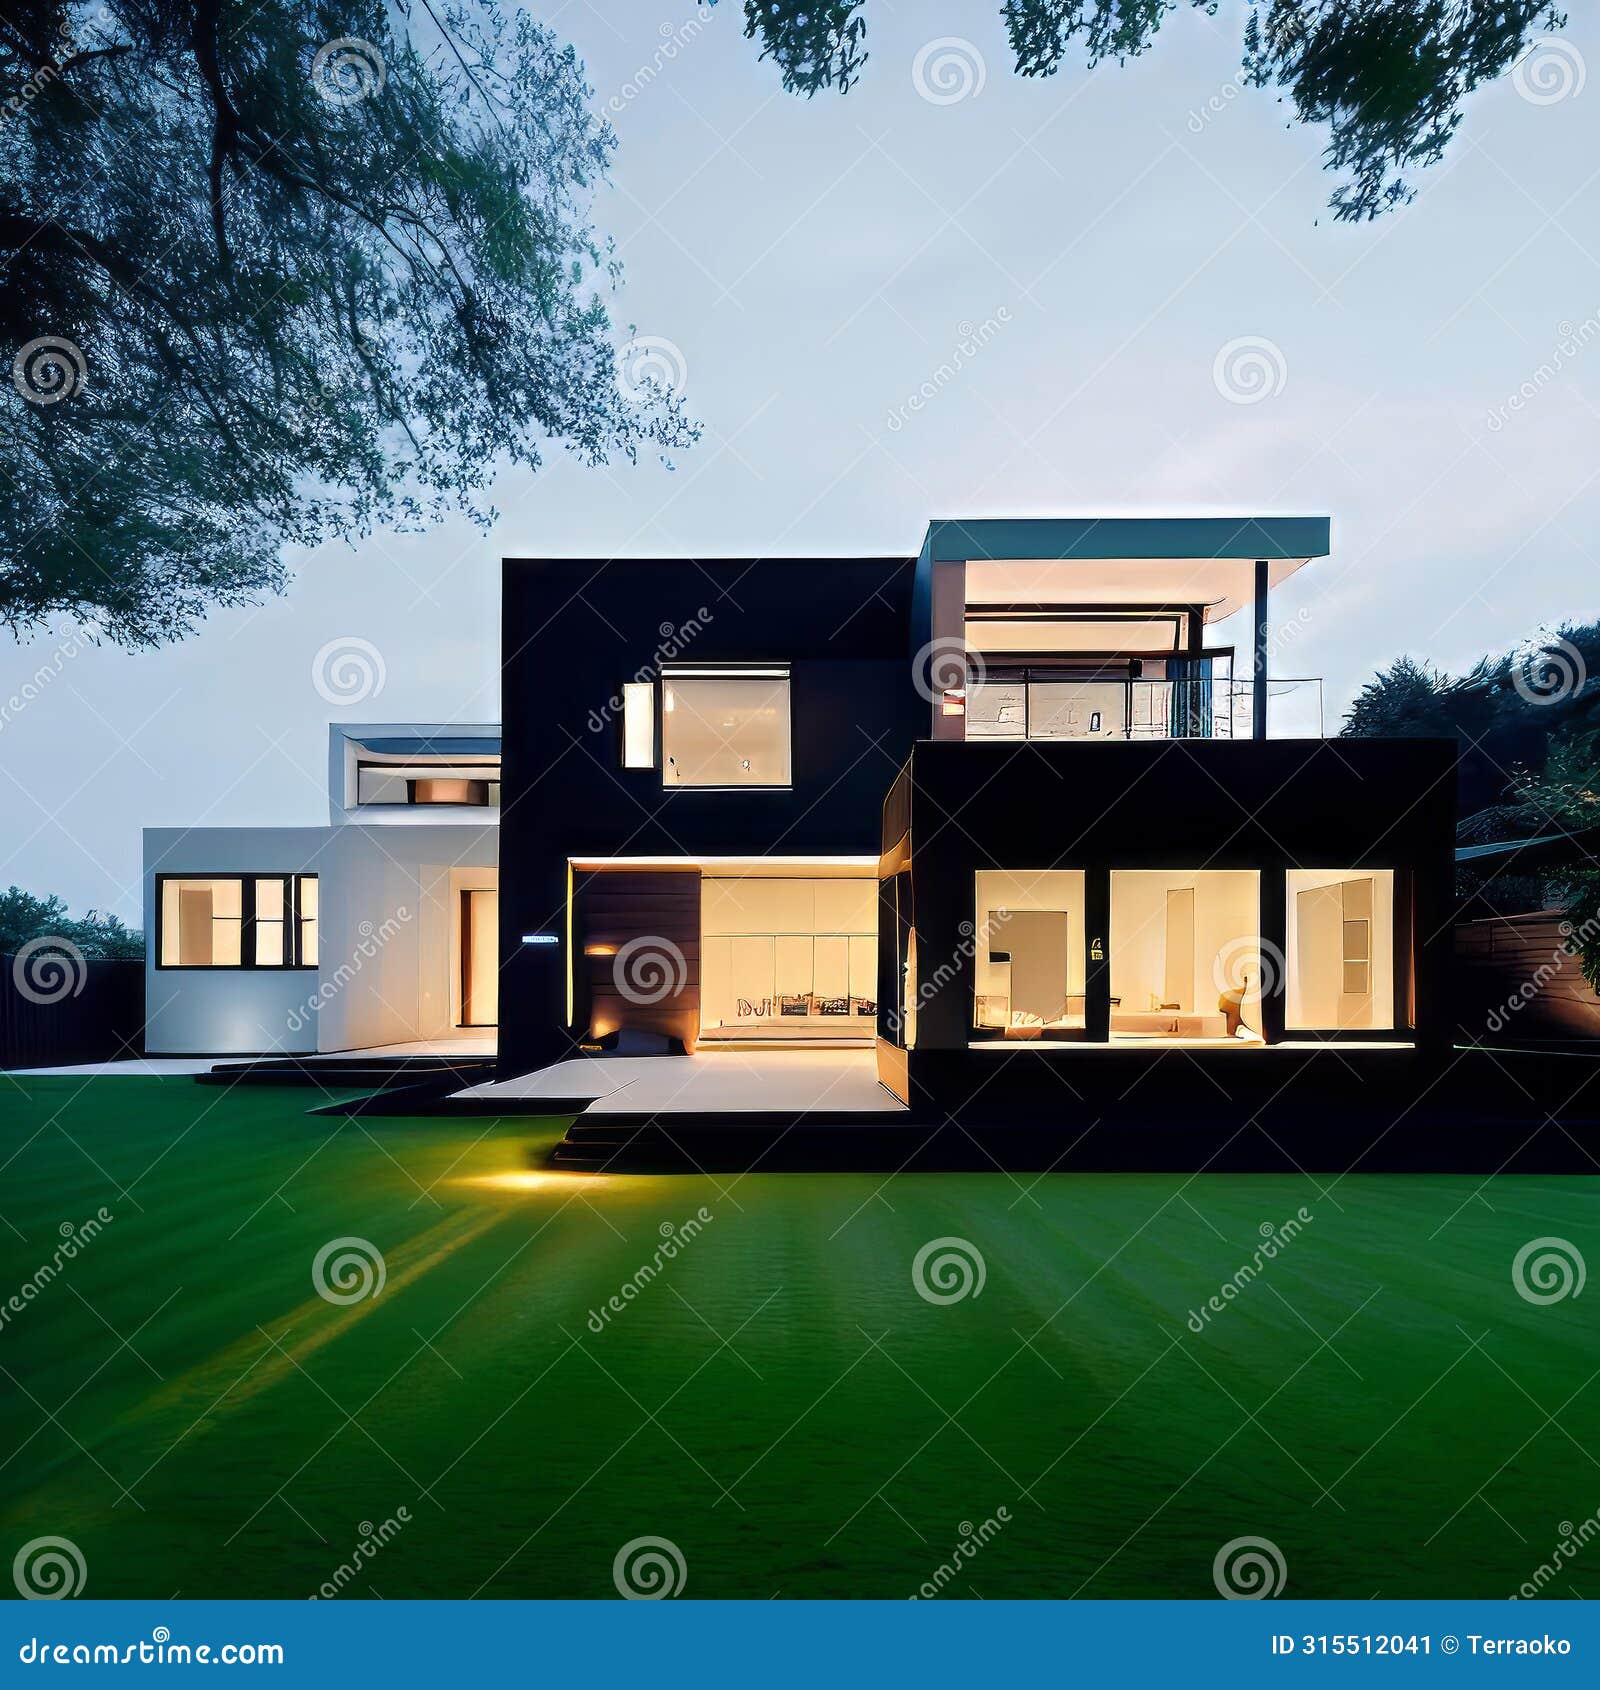 luxurious villa for outdoor living, ed according to algorithms in the form of a street view